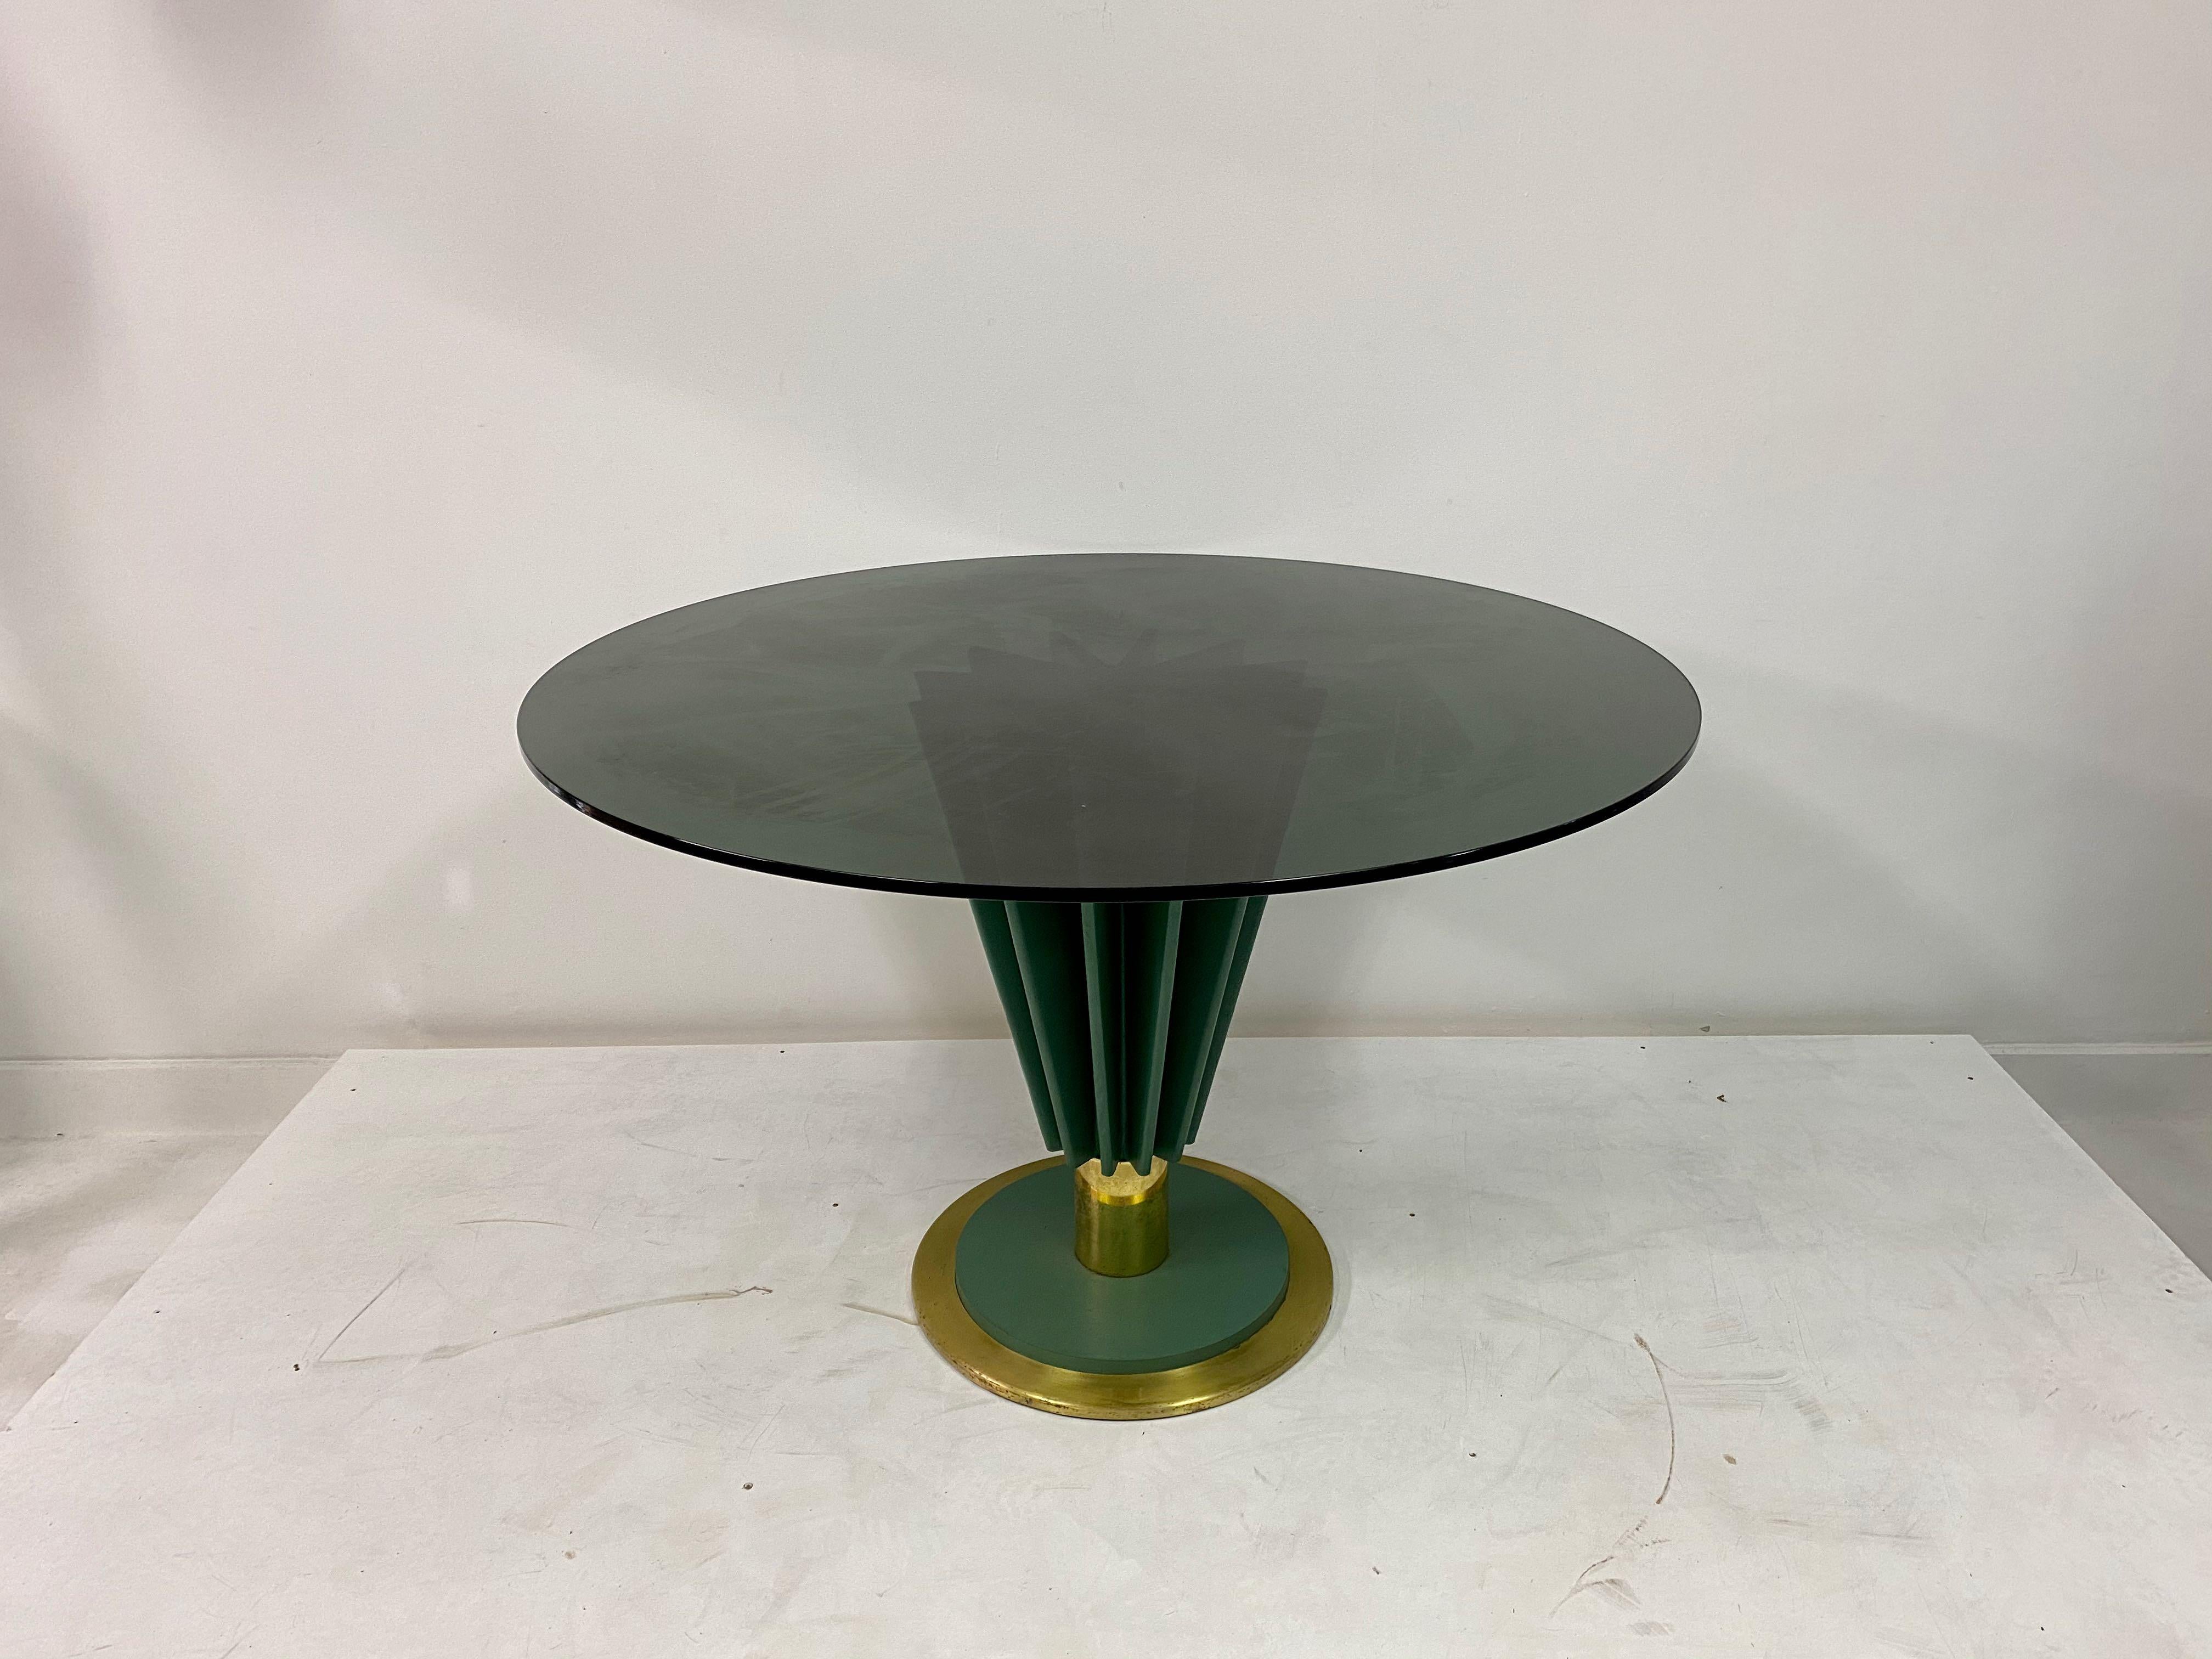 Hollywood Regency 1970s Brass and Green Painted Iron Dining Table by Pierre Cardin